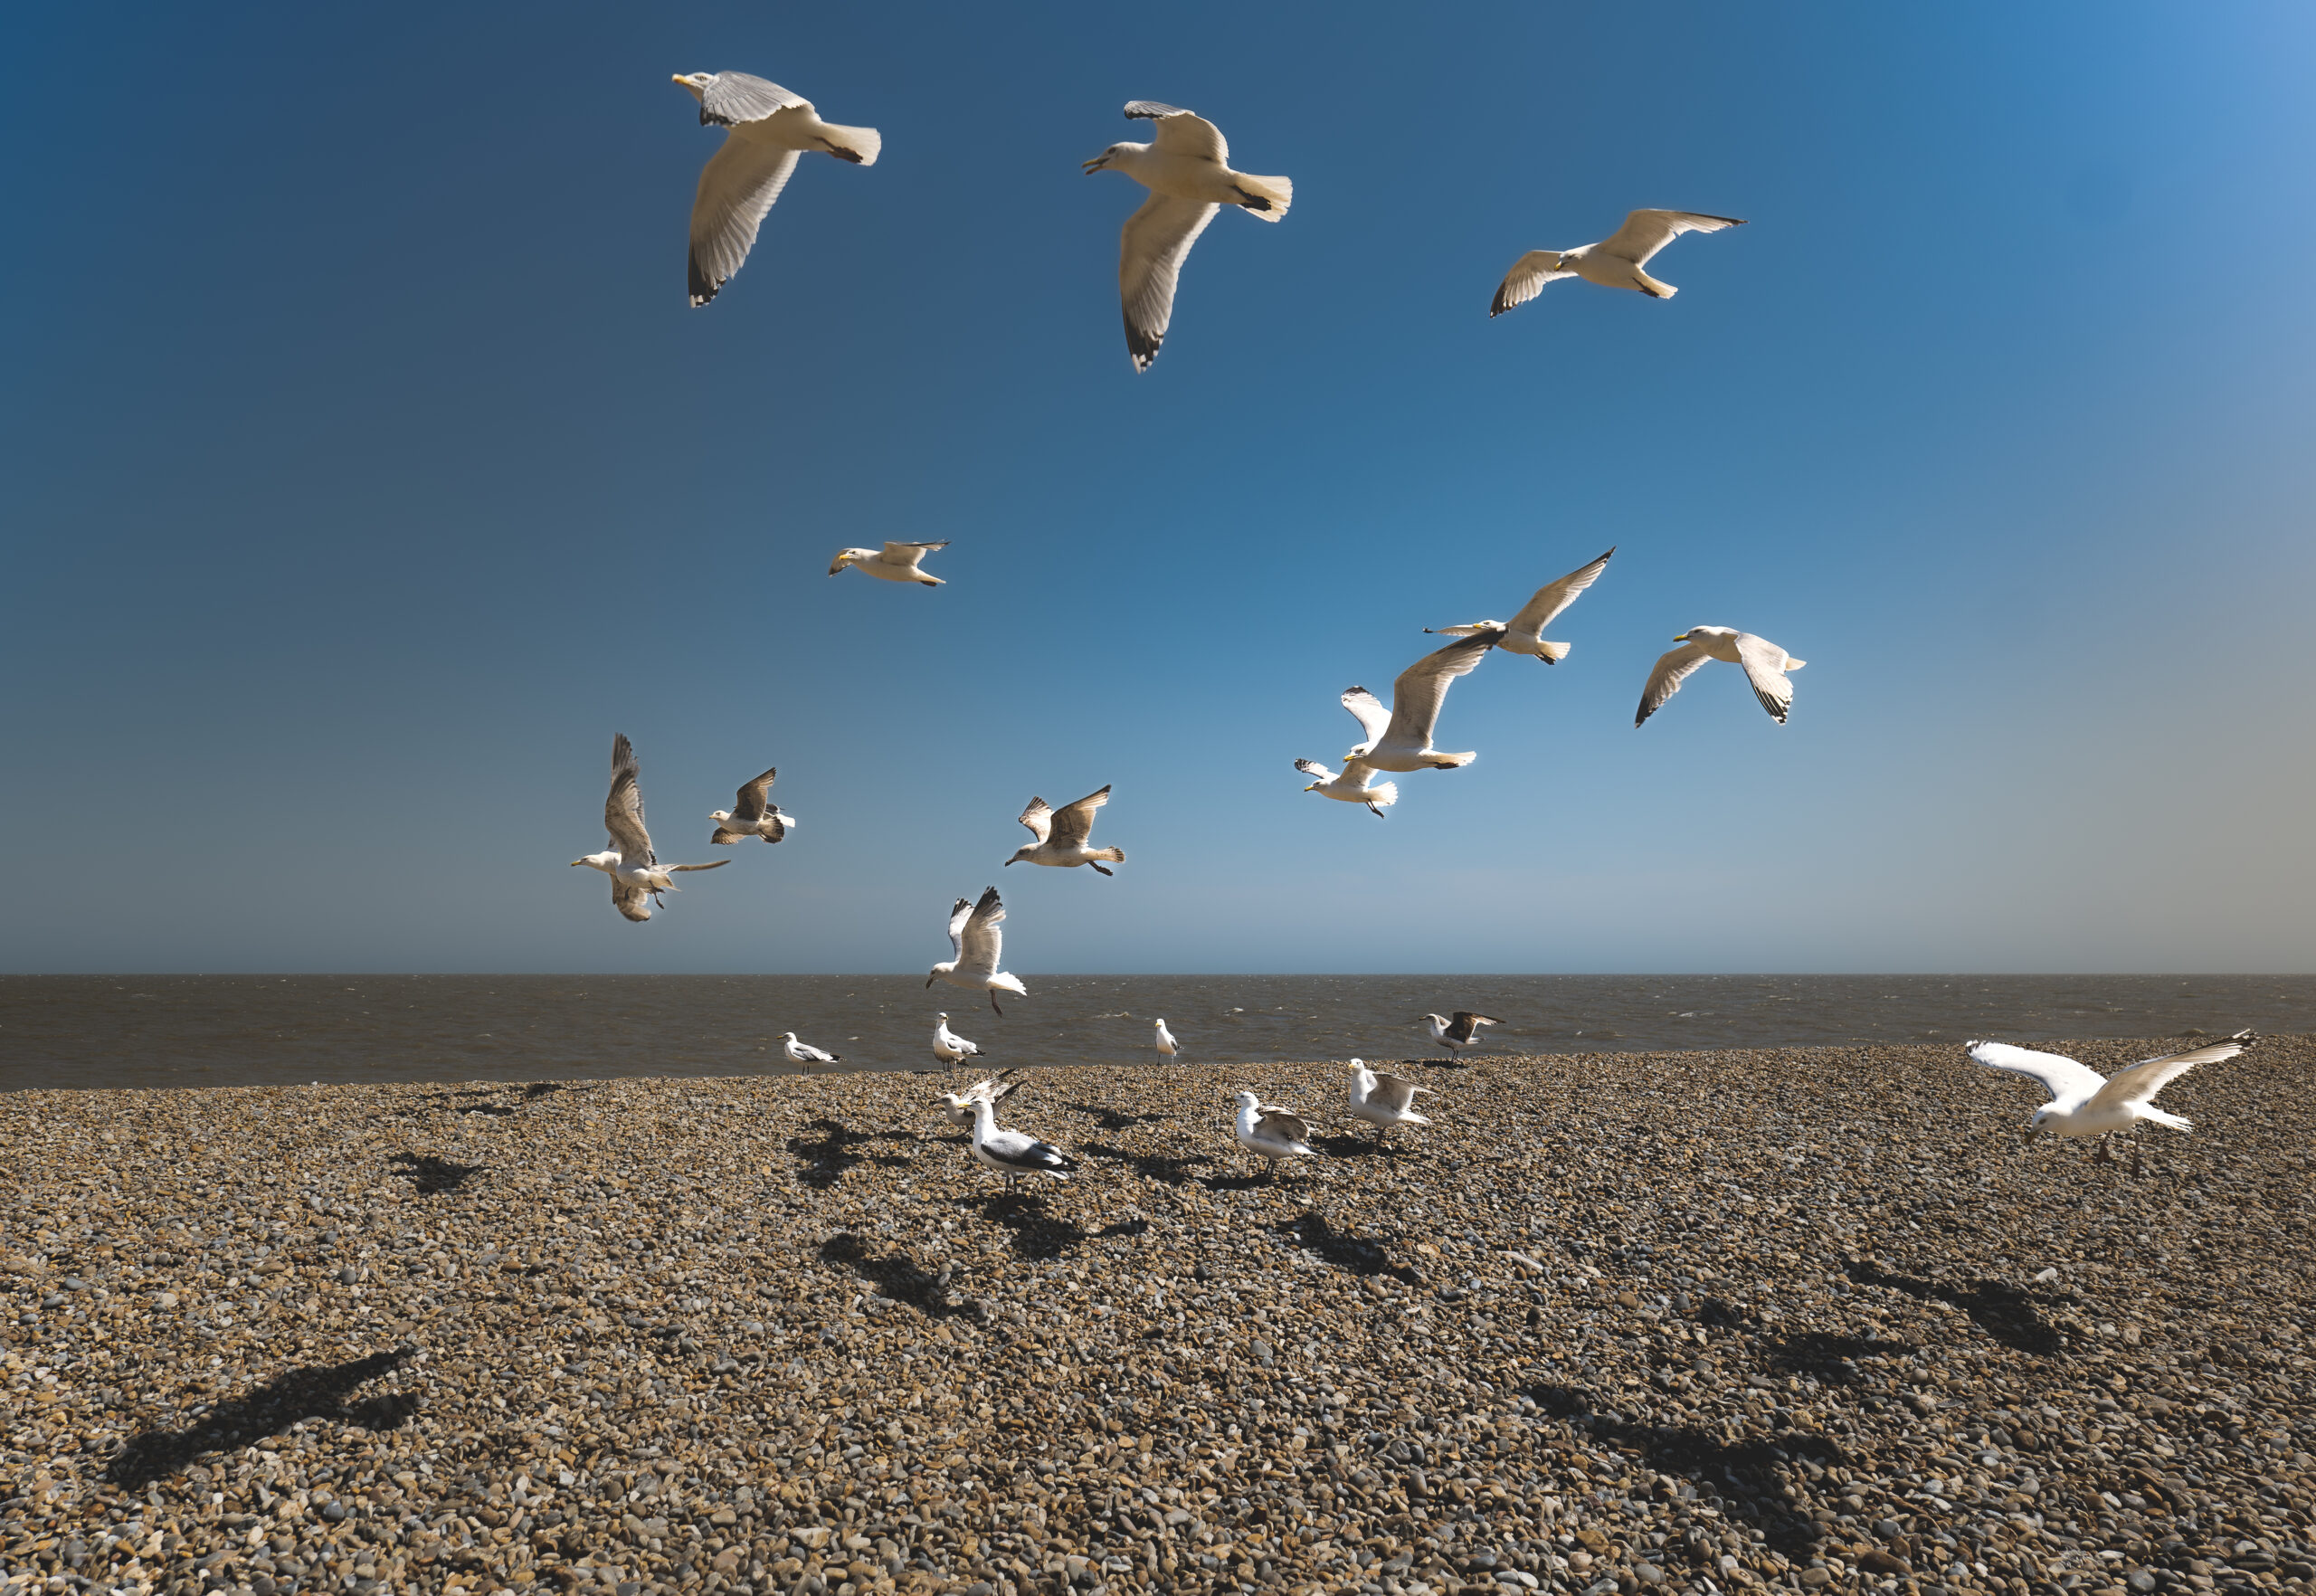 Overcoming imposter syndrome - seagulls at the beach